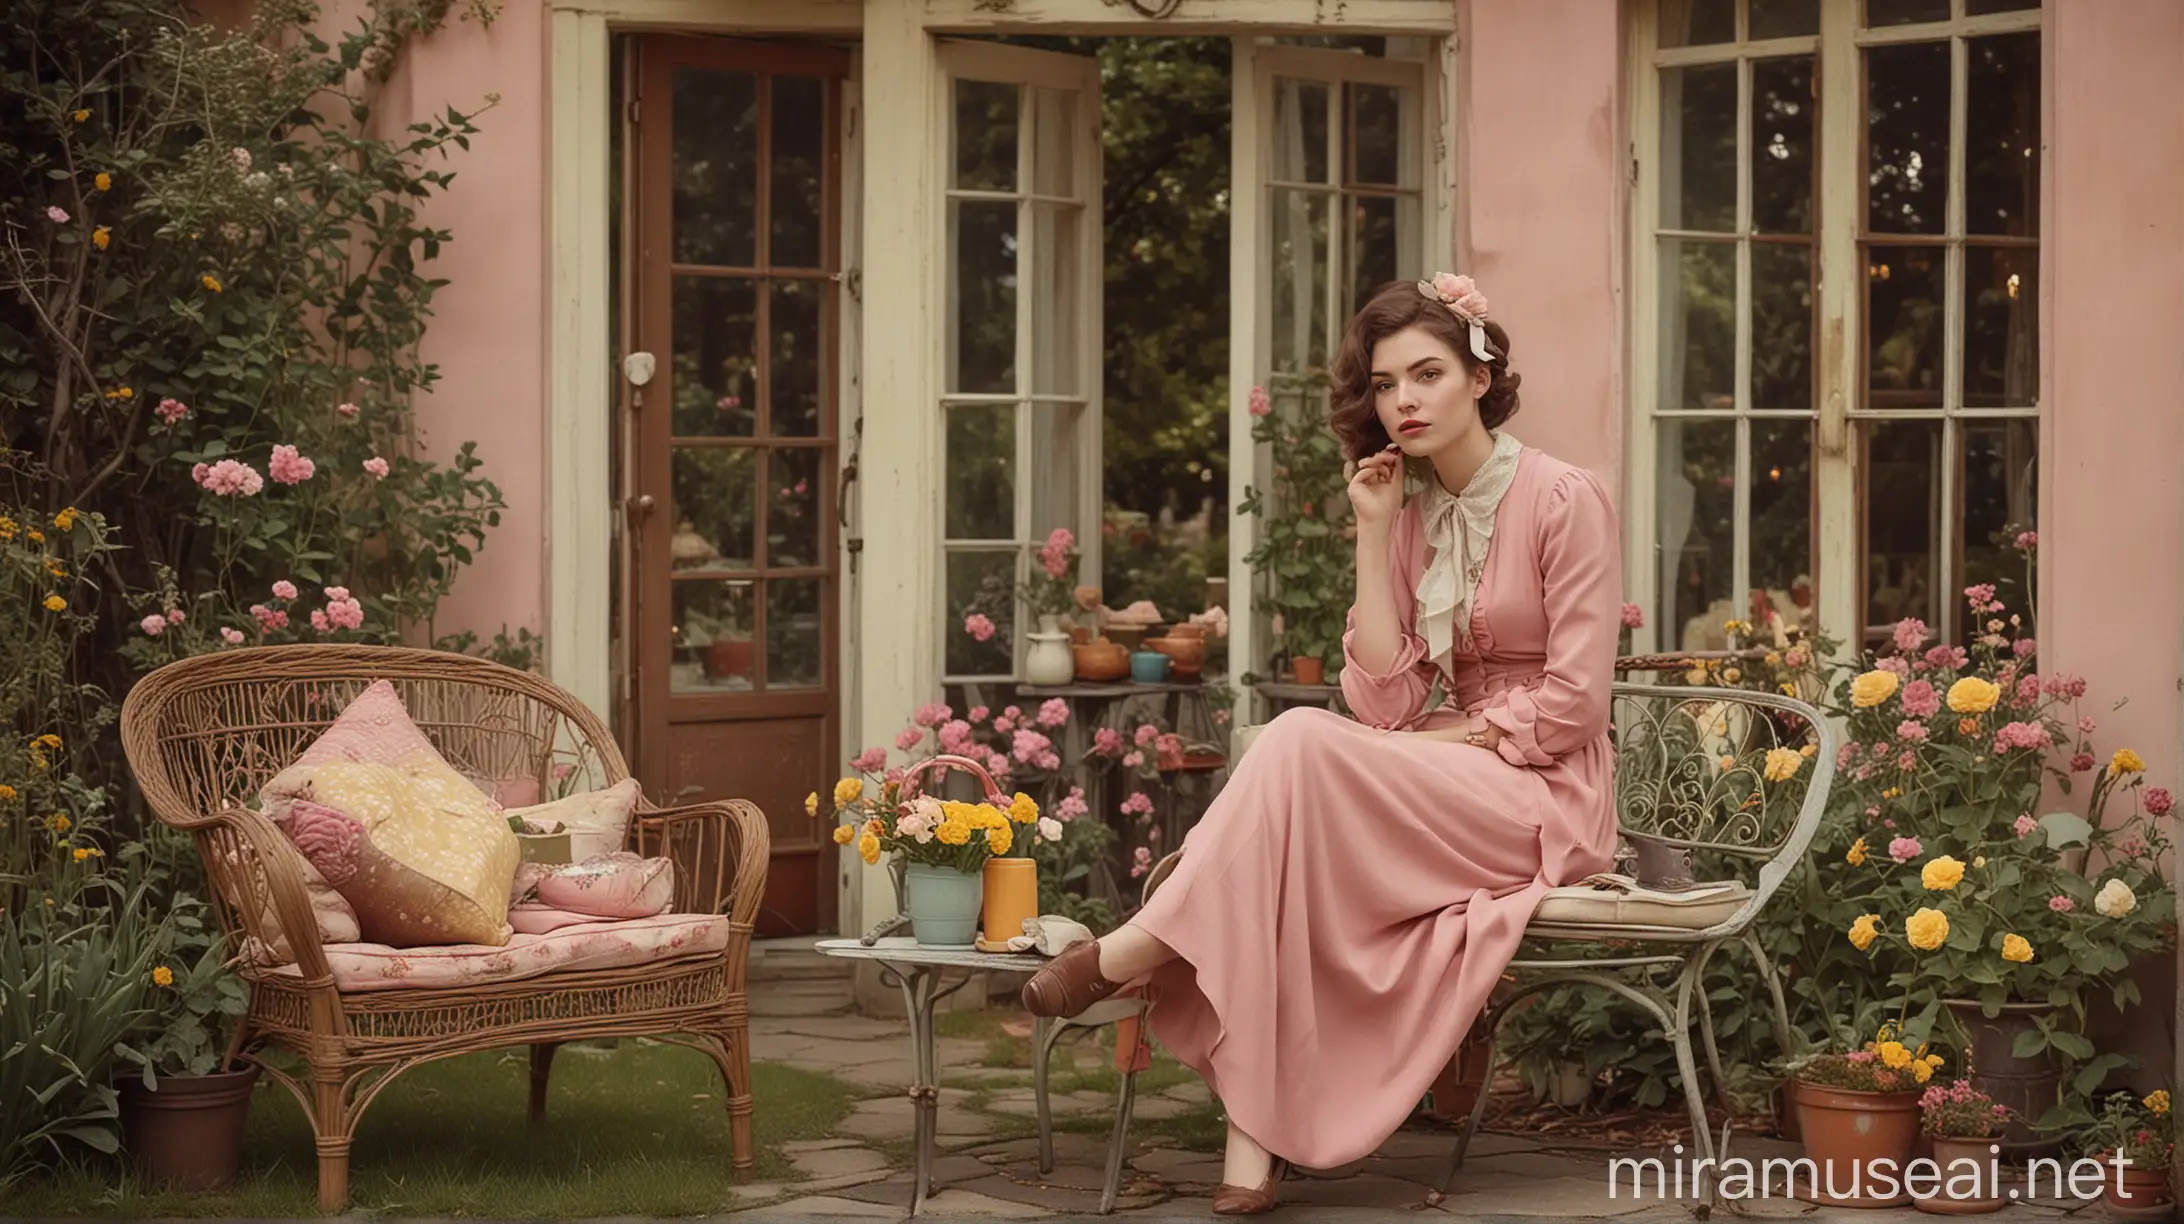 Vintage Lady in Thoughtful Contemplation in Pastel Backyard Setting